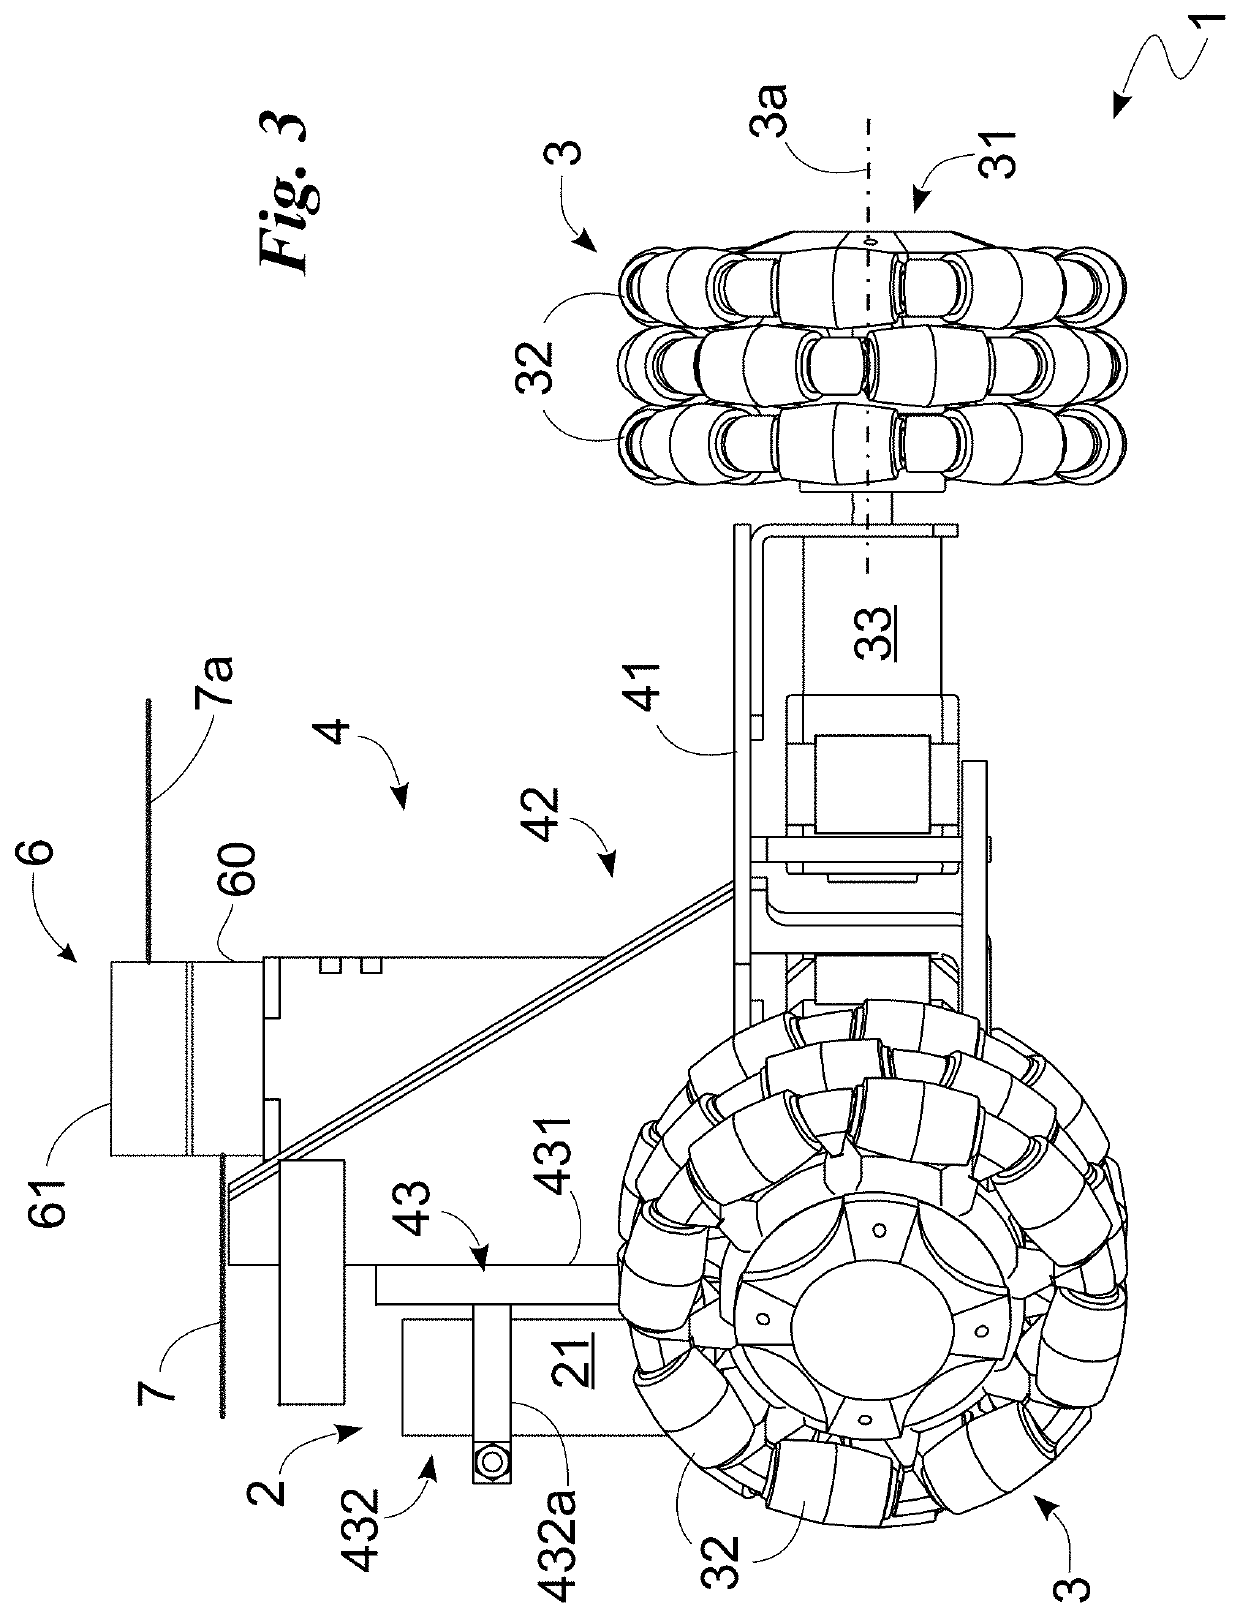 Tool system and method of operation of said tool system